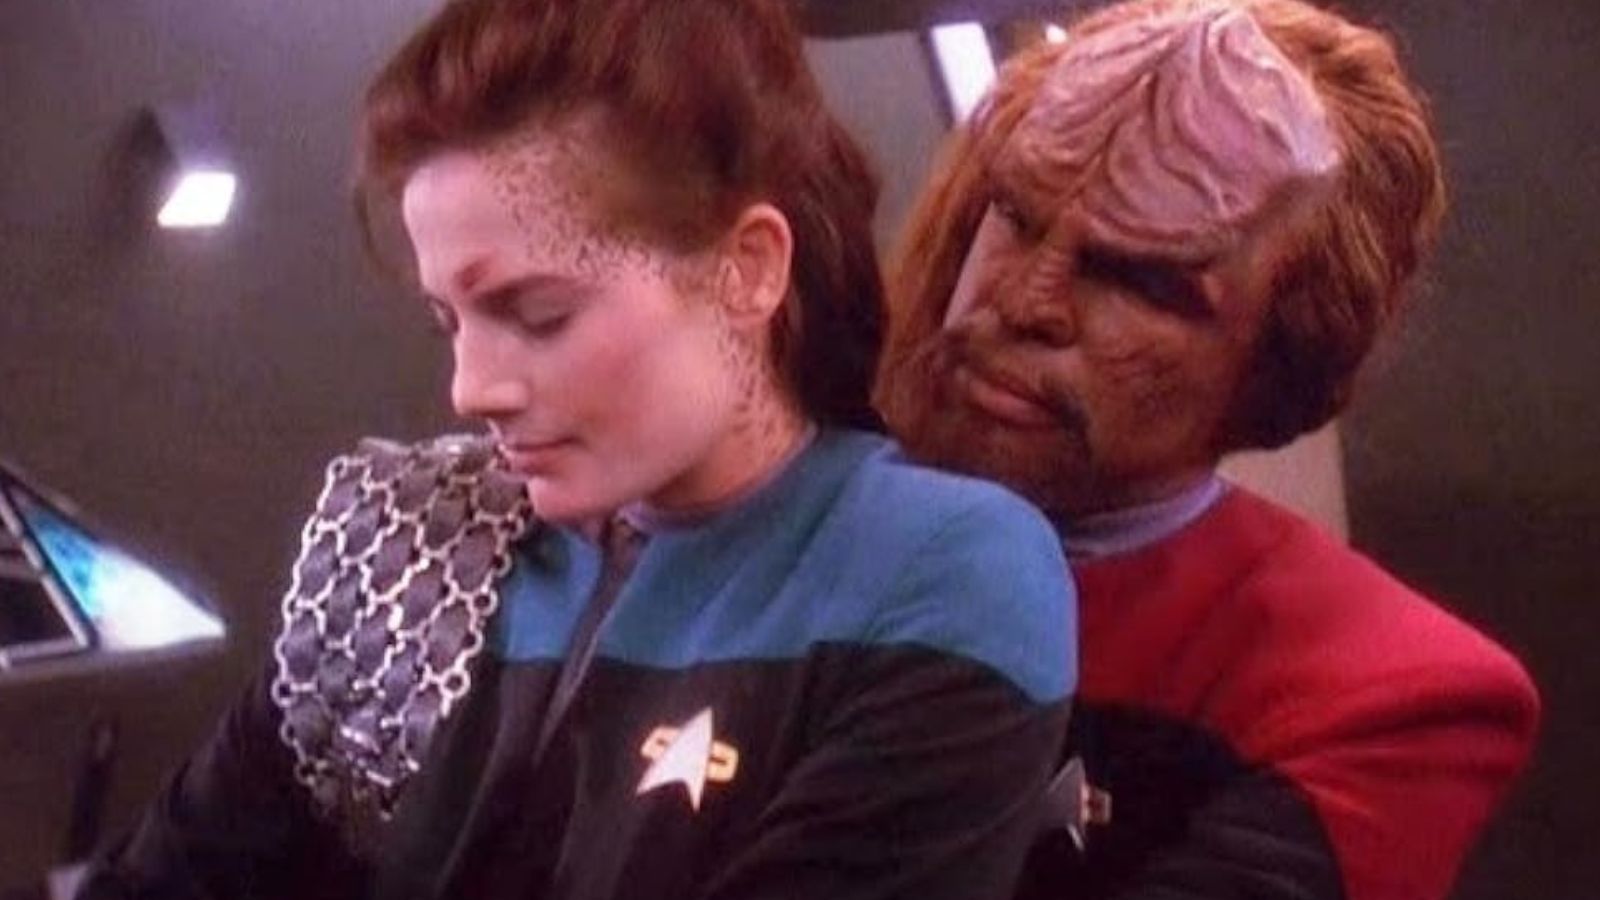 <span>The Deep Space Nine (DS9) series, which aired between 1994 and 1999, holds a special place in many people’s hearts. It featured some of Star Trek’s most legendary characters, such as Worf, played by Michael Don, and Quark, played by Armin Shimerman. </span>  <span>This series was notably darker and more thought-provoking than any other Star Trek series, but it has been criticized for being too dramatic and appearing more like a soap opera in space. </span>